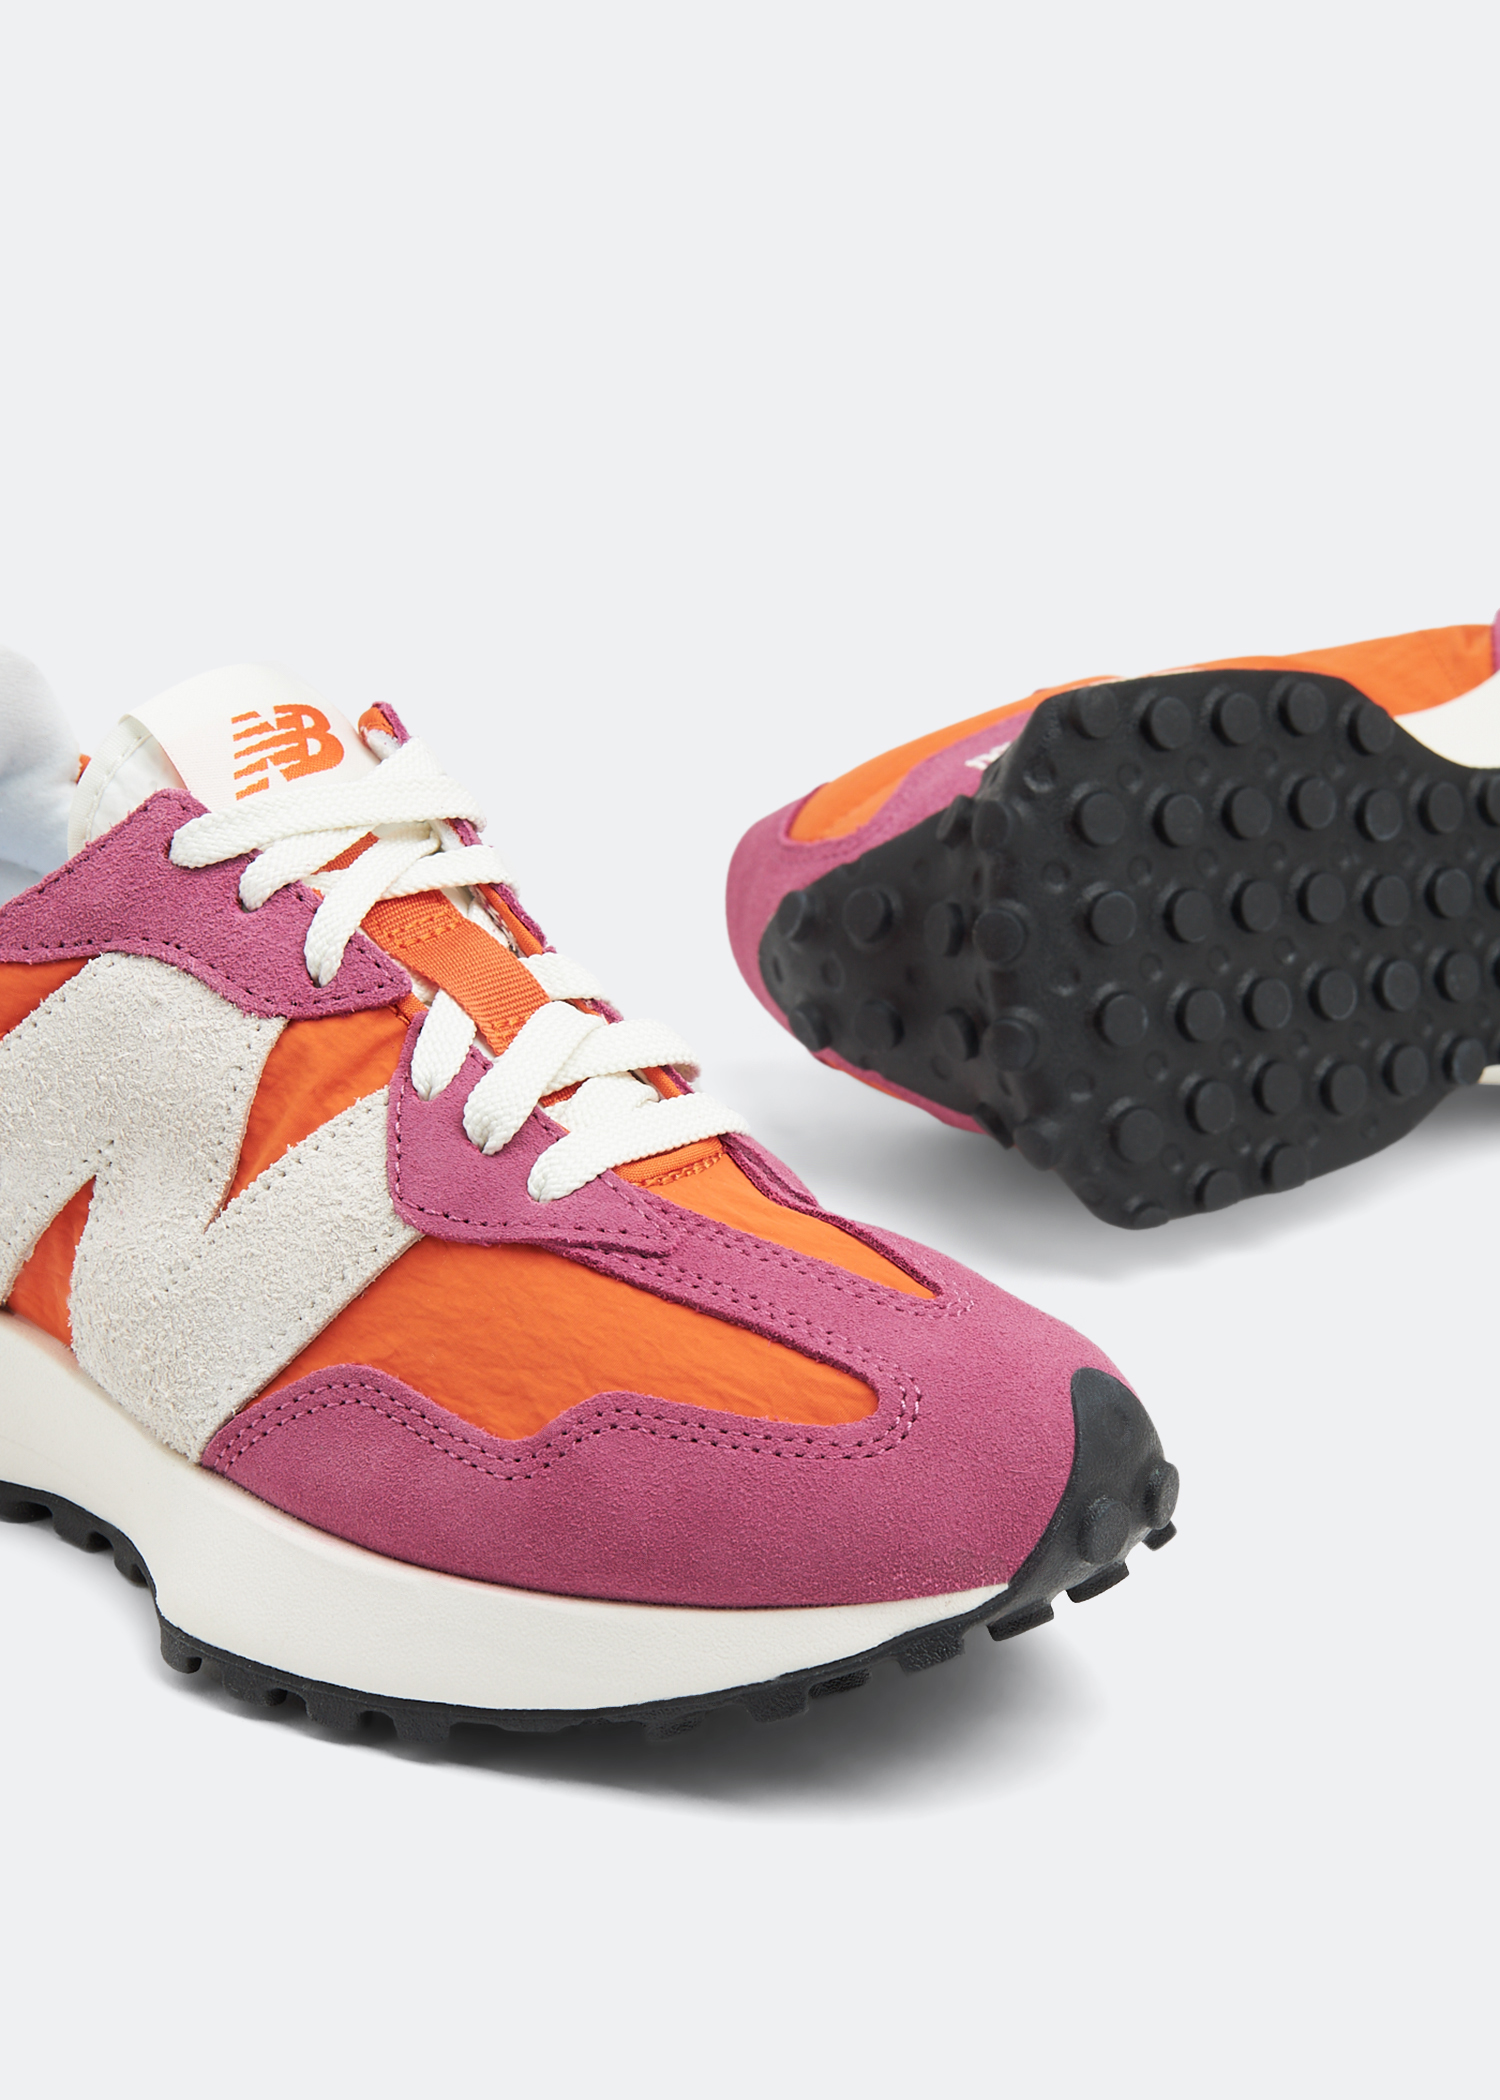 New Balance 327 sneakers for Women - Orange in UAE | Level Shoes